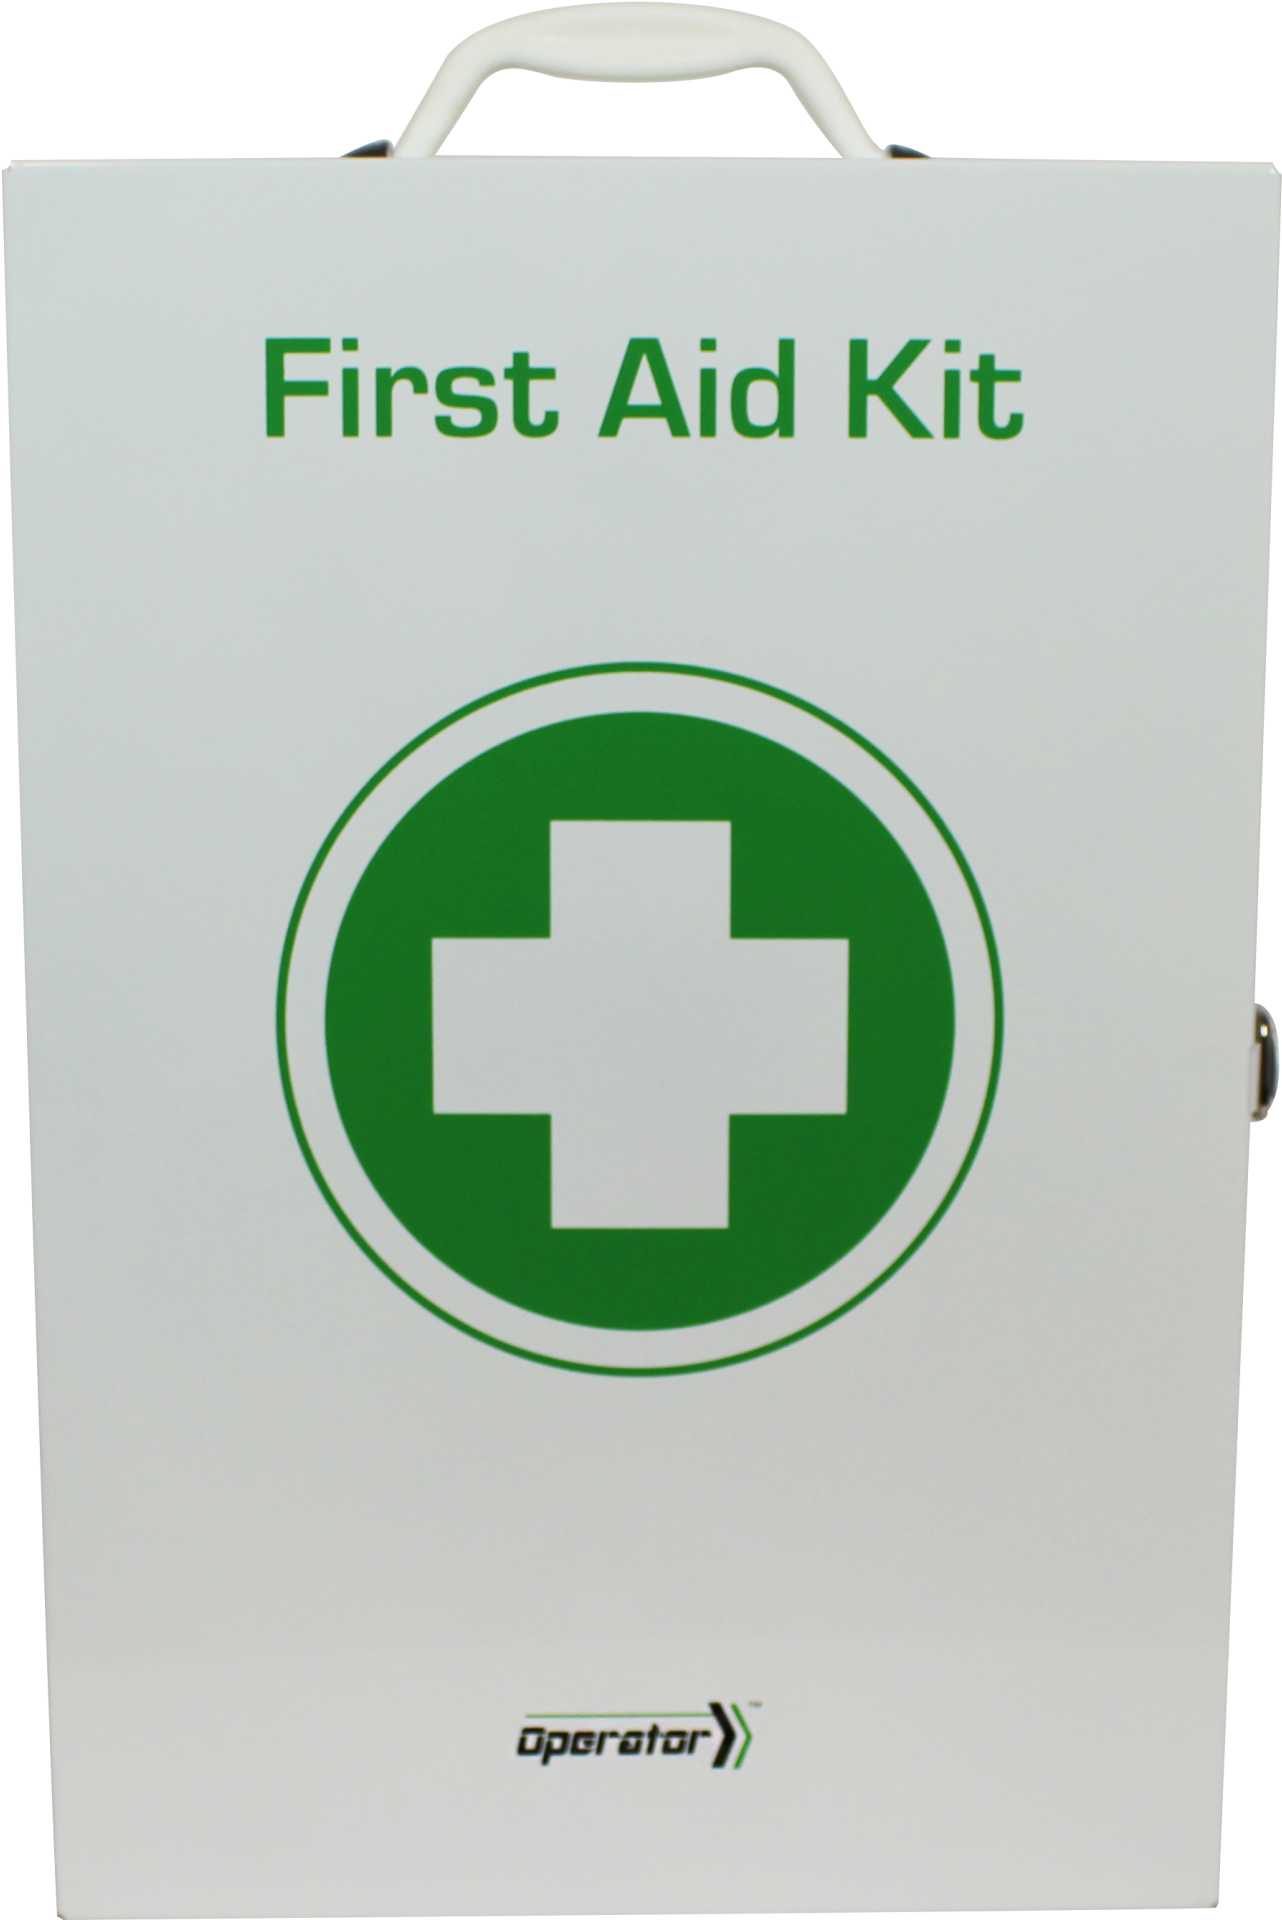 First Aid Kit White Background